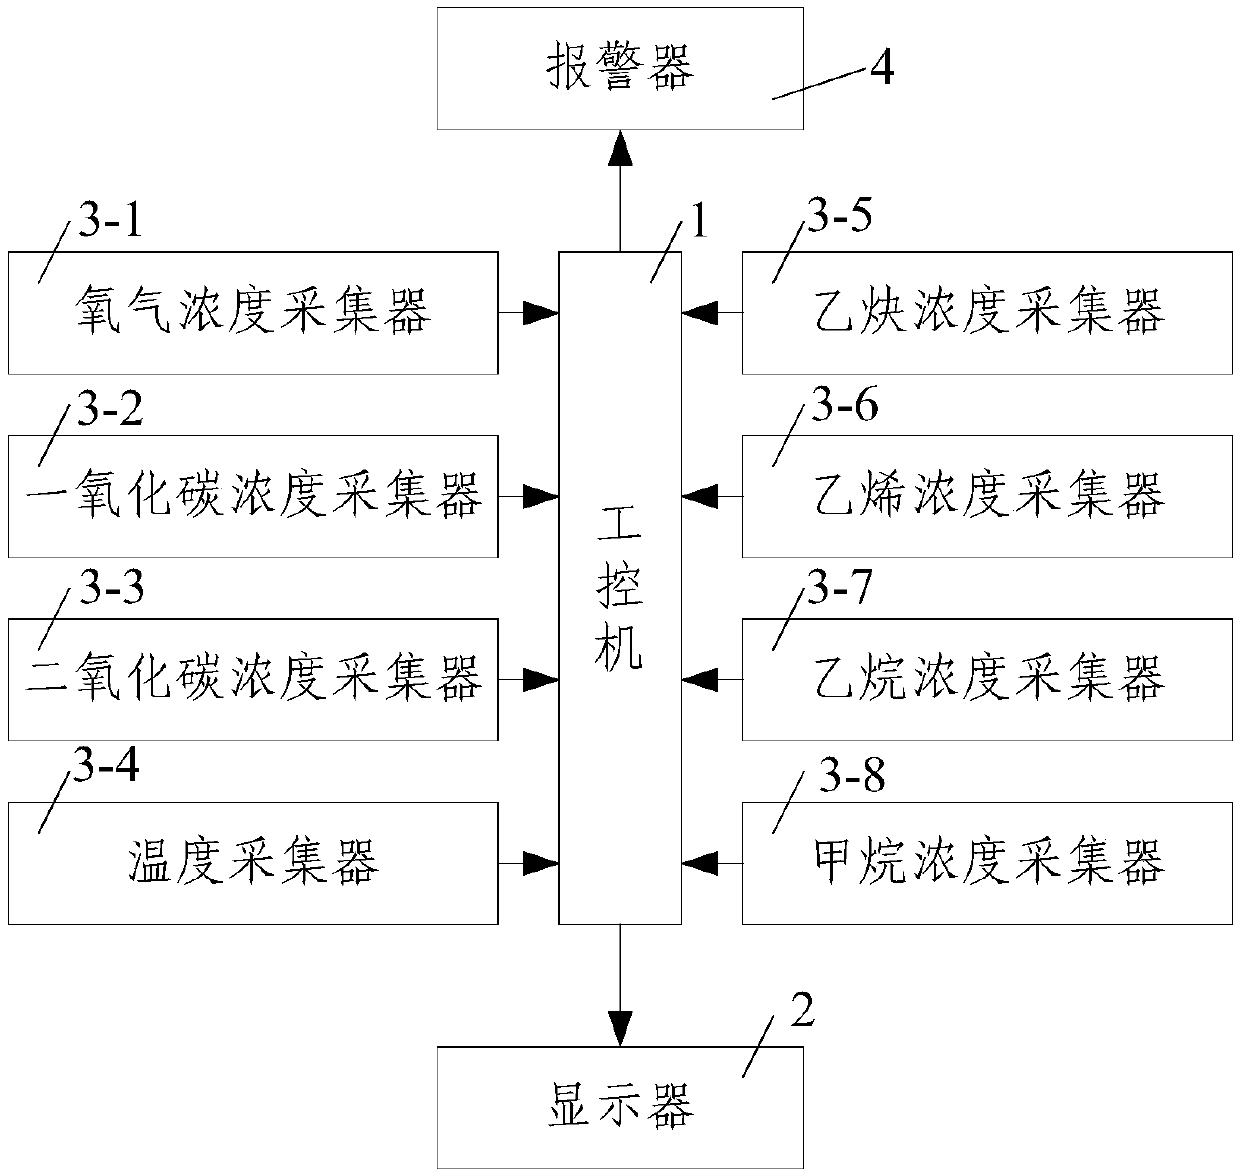 Spontaneous combustion classification early warning and active classification prevention and control method for coal mine